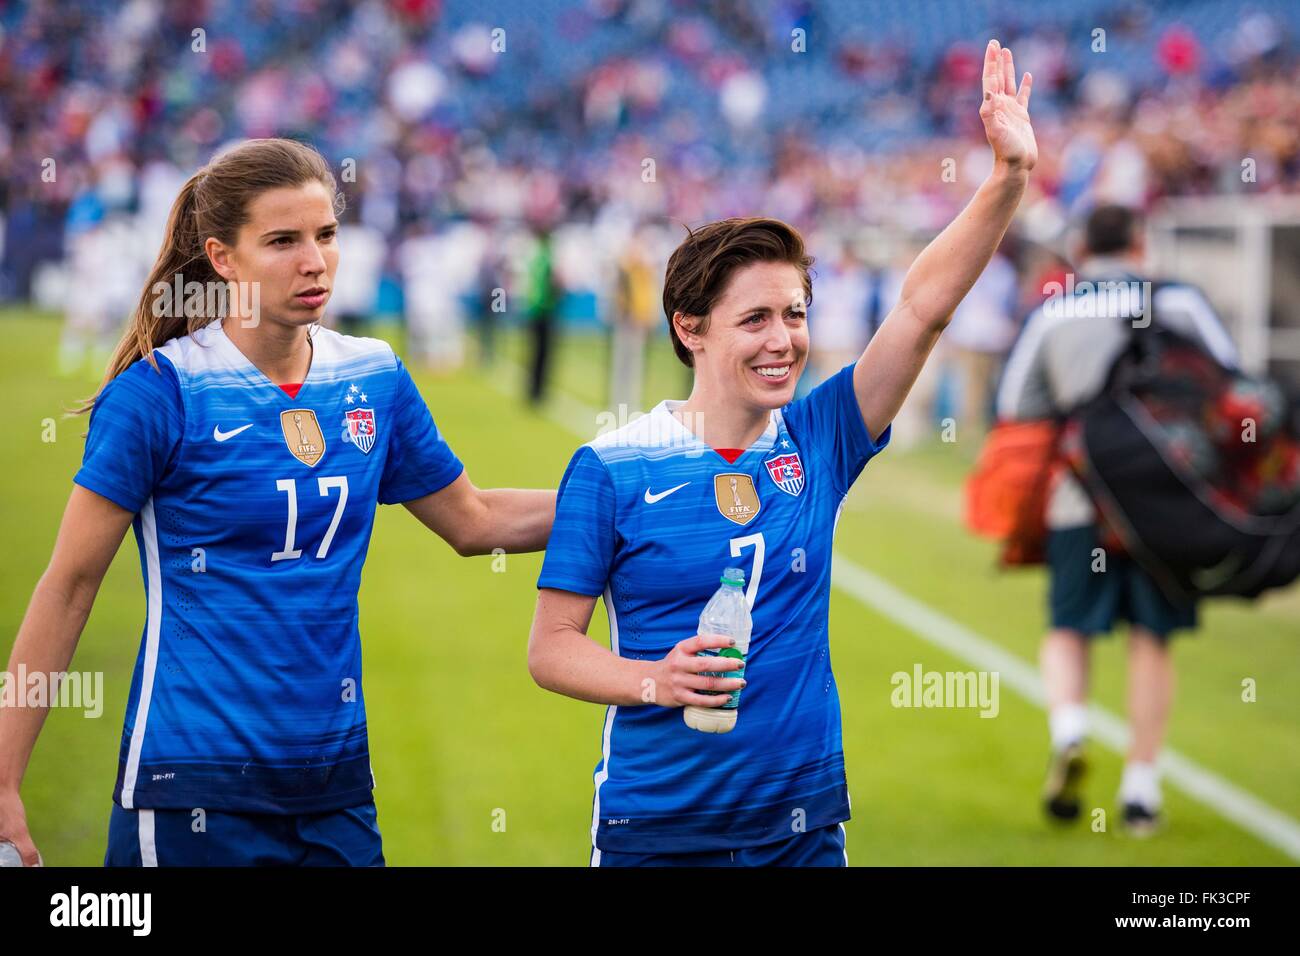 Nashville, Tennessee, USA. 06th Mar, 2016. United States DF Meghan Klingenberg (7) and United States MF Tobin Heath (17) during the She Believes Cup Women's International Soccer match between France and the United States at Nissan Stadium on March 6, 2016 in Nashville, TN. Jacob Kupferman/CSM Credit:  Cal Sport Media/Alamy Live News Stock Photo